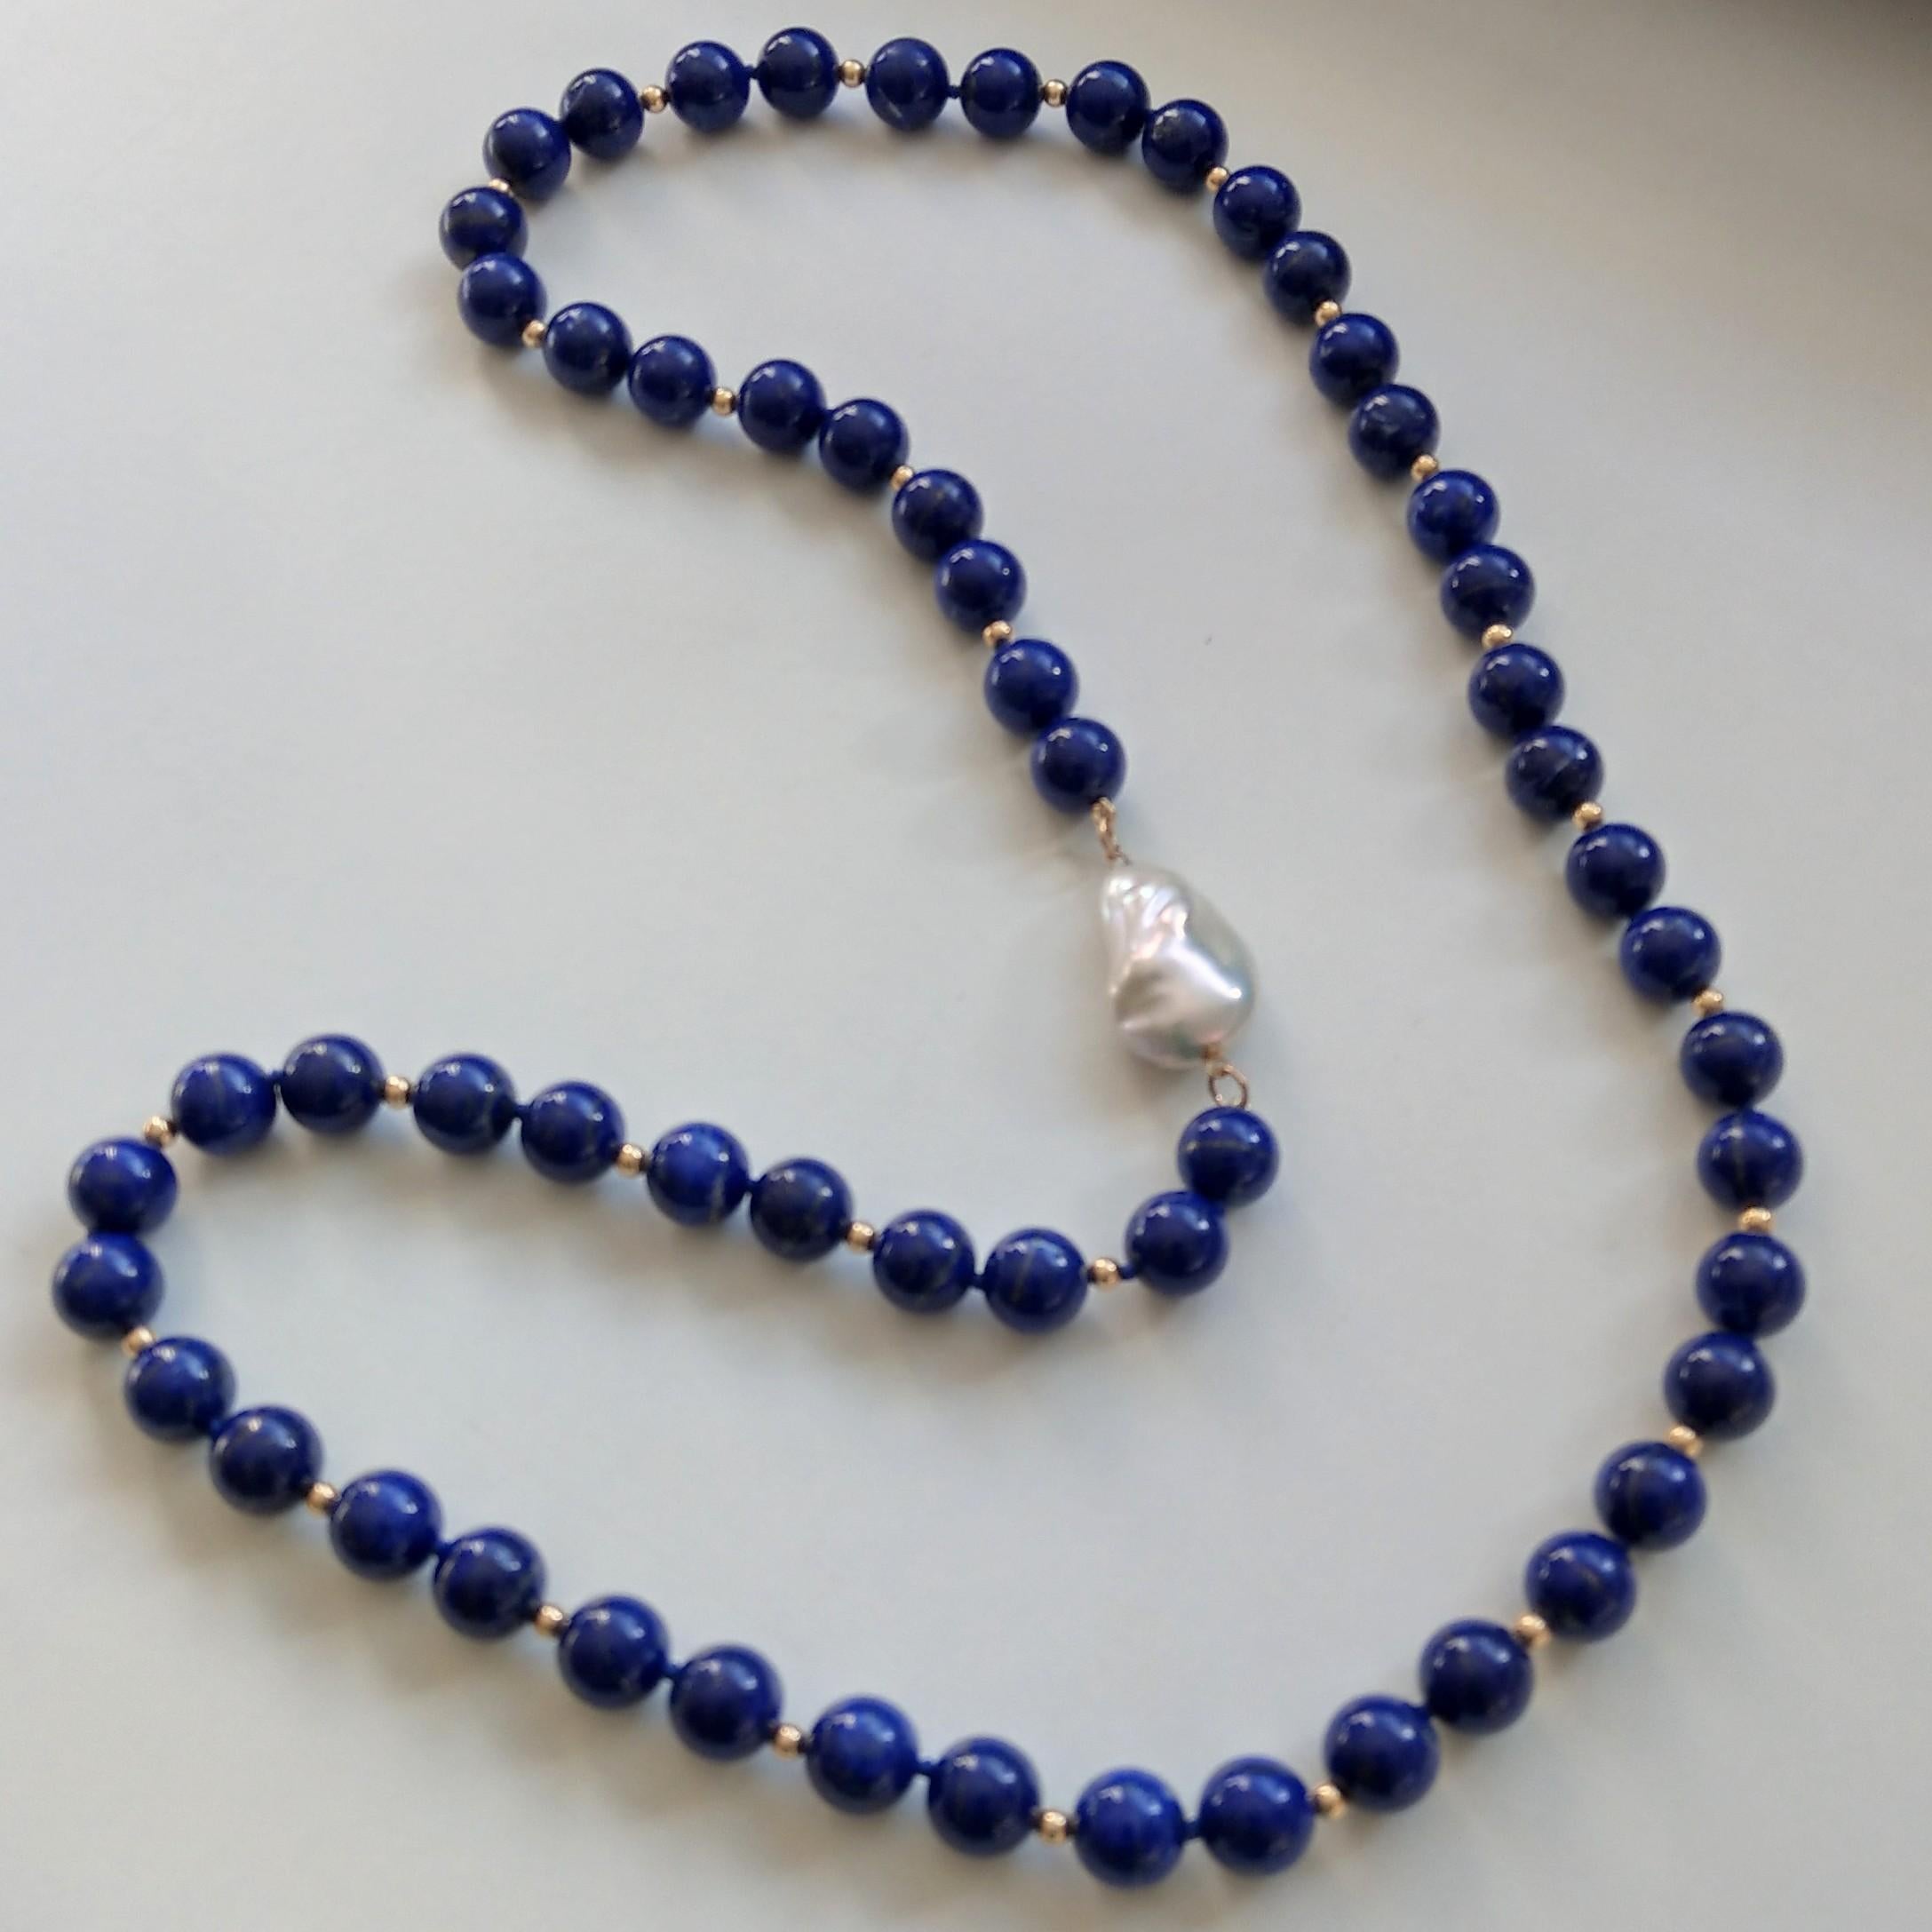 Matinee length natural Lapis Lazuli beads 12mm hand knotted on blue thread with 4mm Gold filled beads and a 30x19mm high grade natural baroque Fresh Water Pearl
Total length of necklace 90cm.

